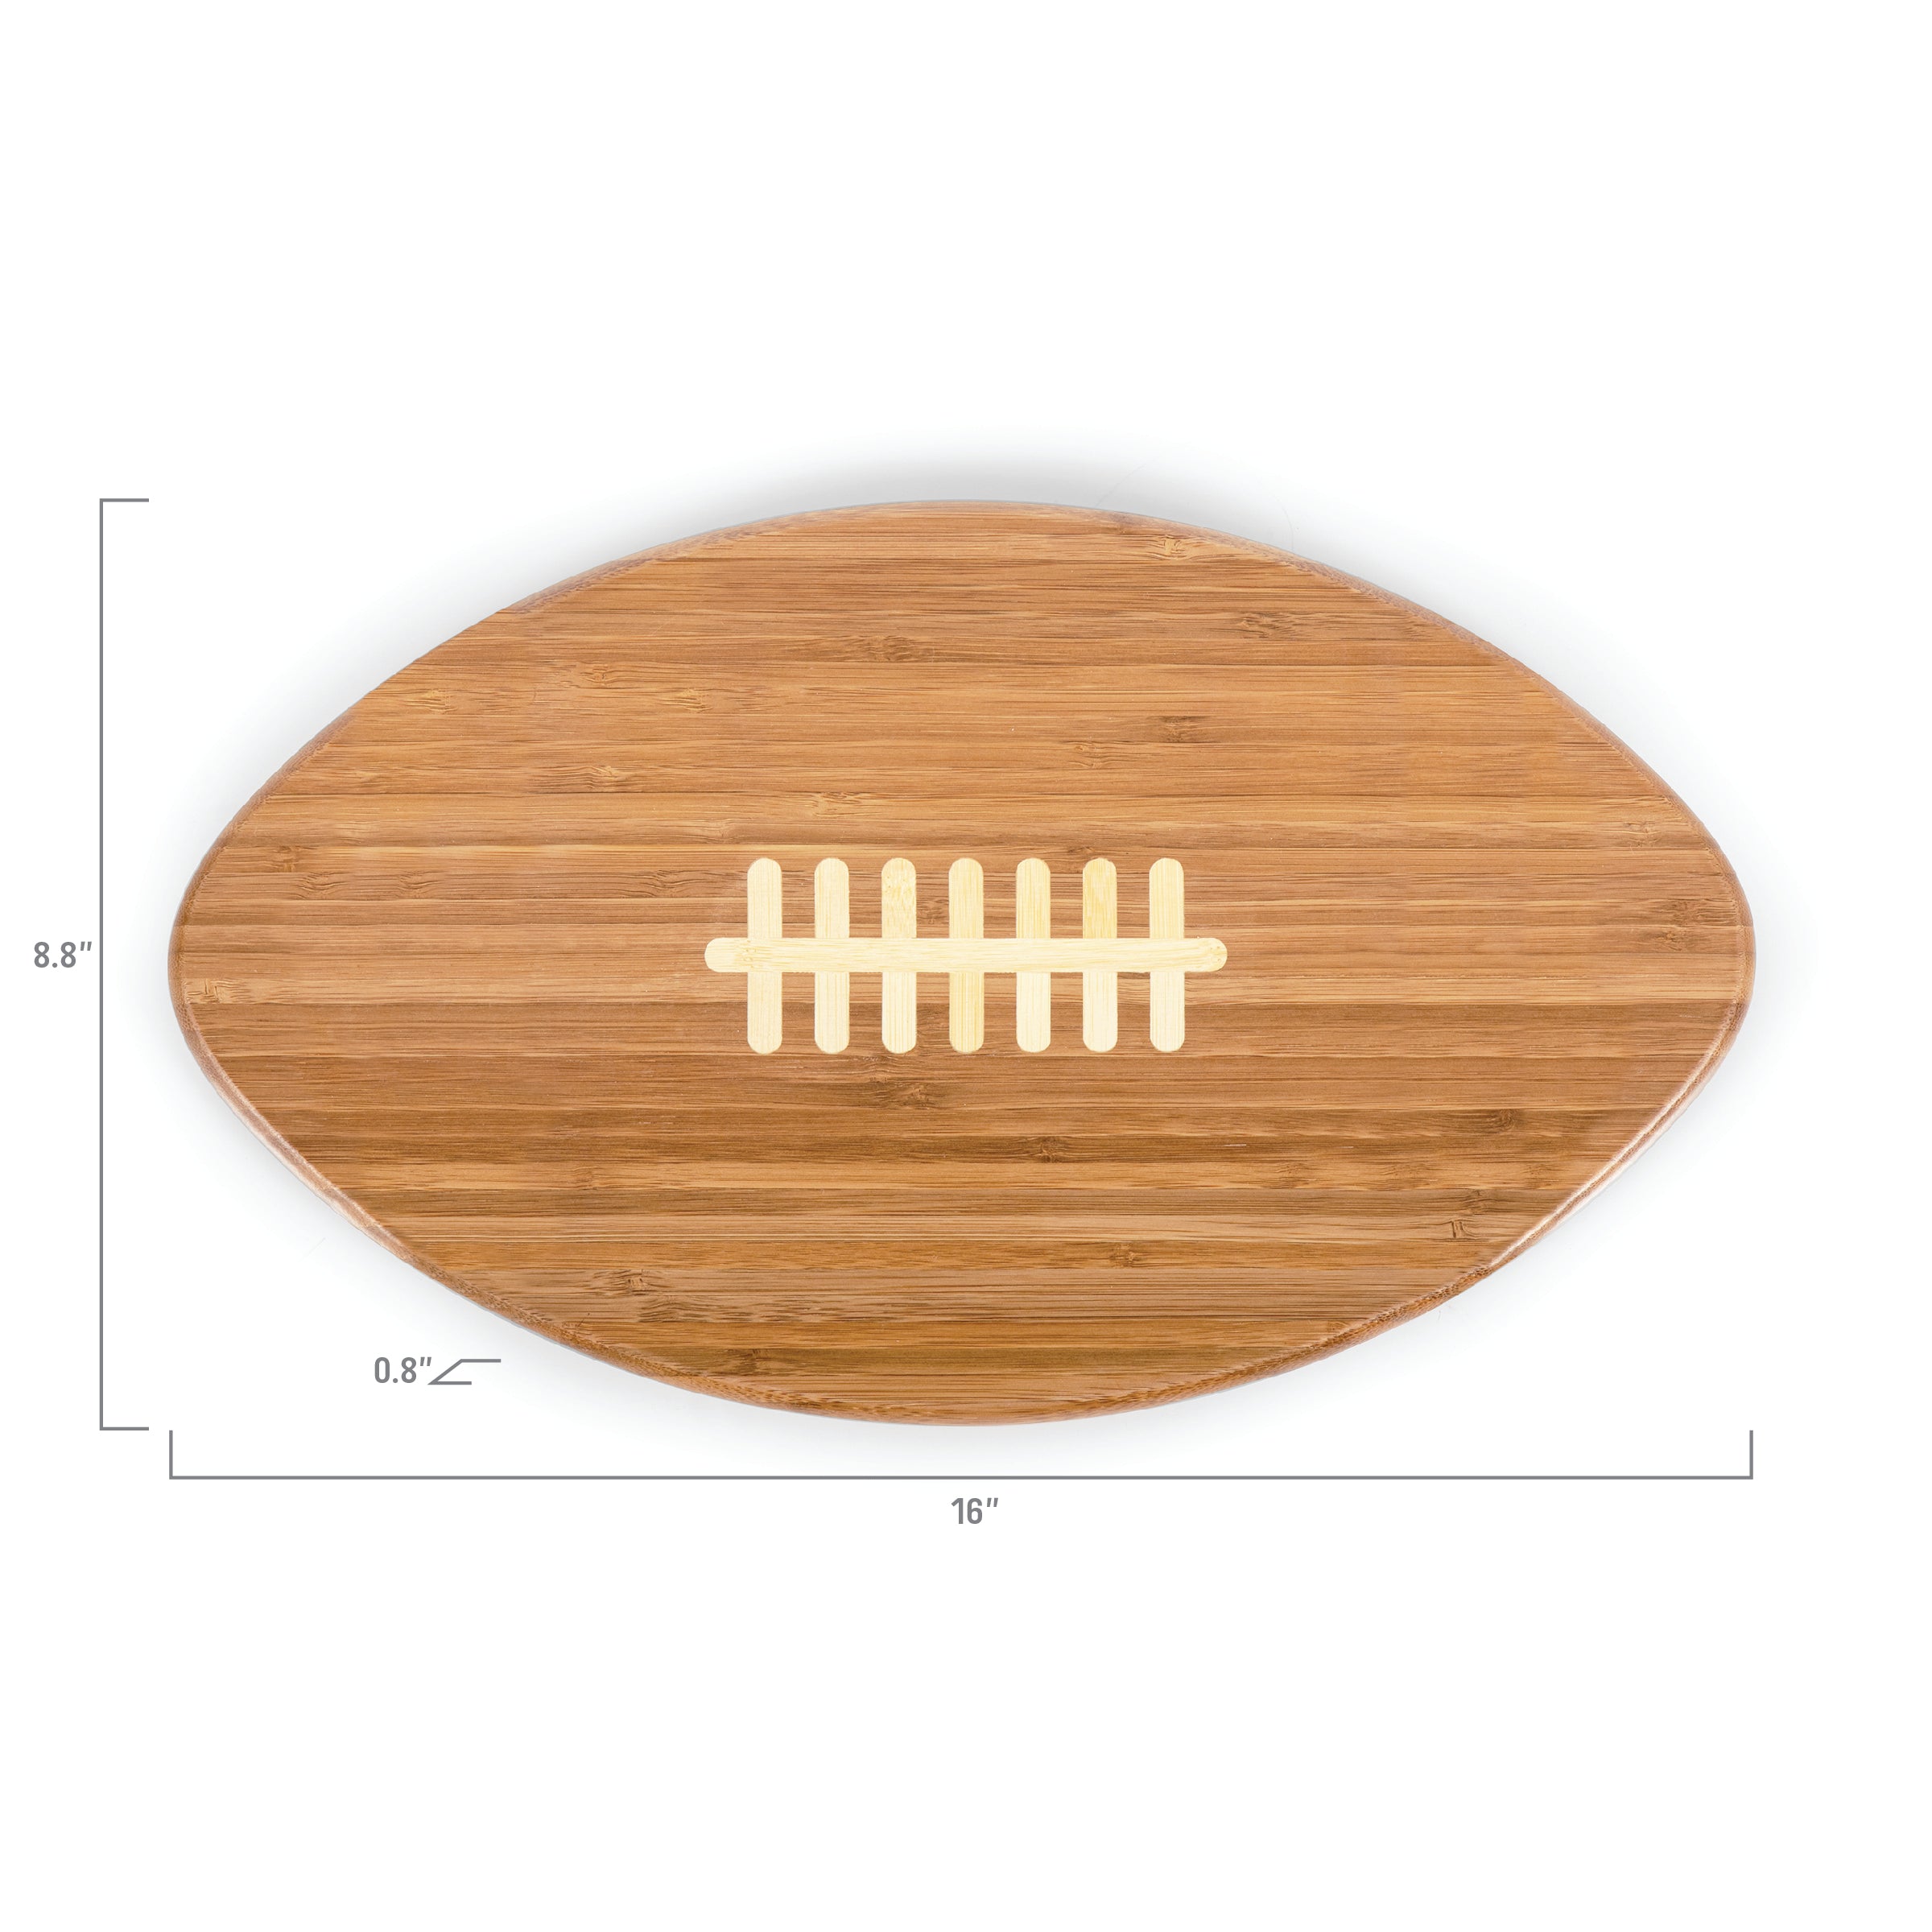 Seattle Seahawks Mickey Mouse - Touchdown! Football Cutting Board & Serving Tray